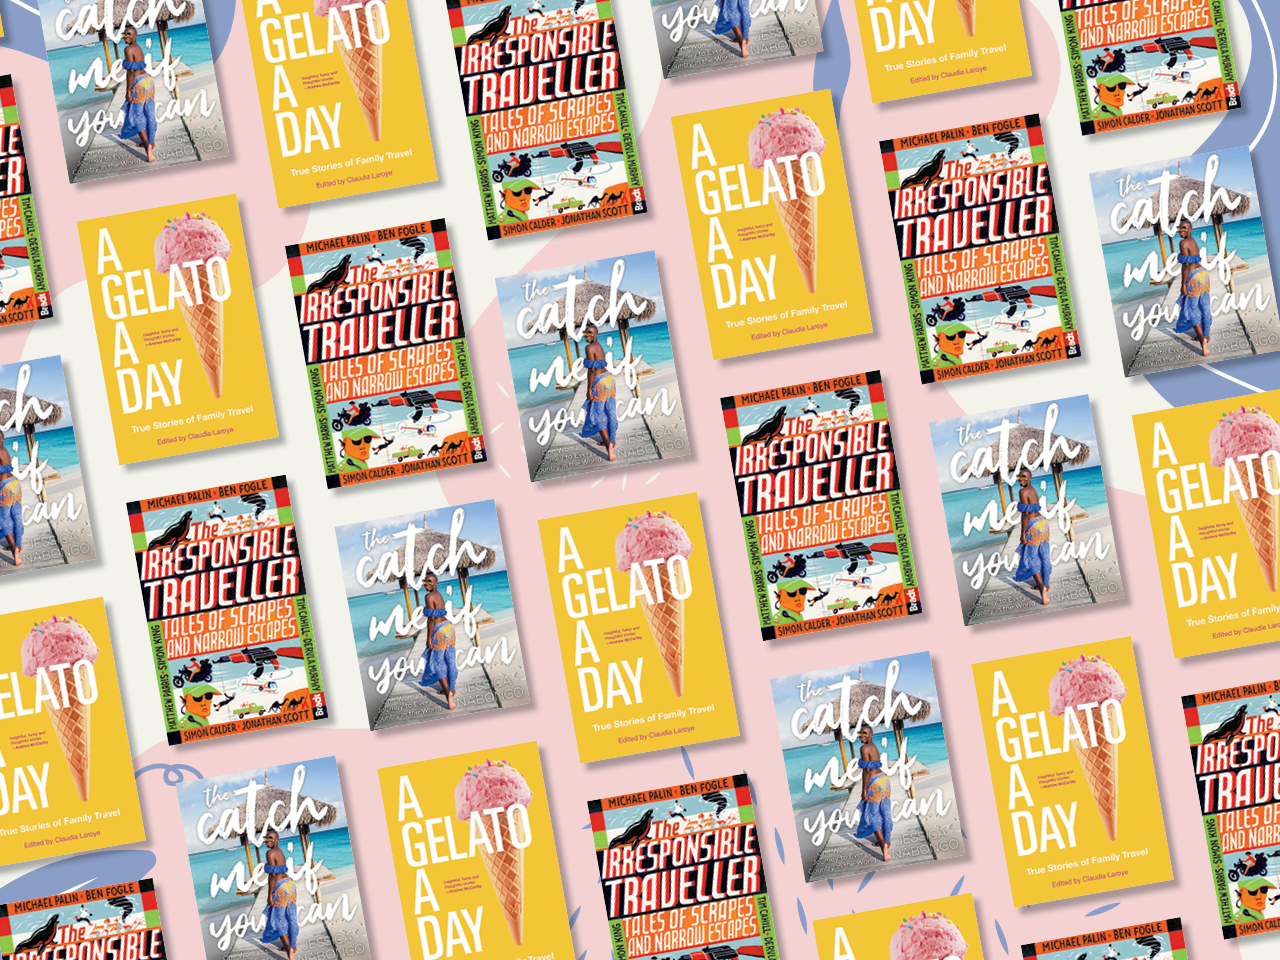 A grid of three tiled book covers: The cover of The Catch me if you can, the cover of A Gelato a day, and the cover of the Irresponsible traveller on a pink background